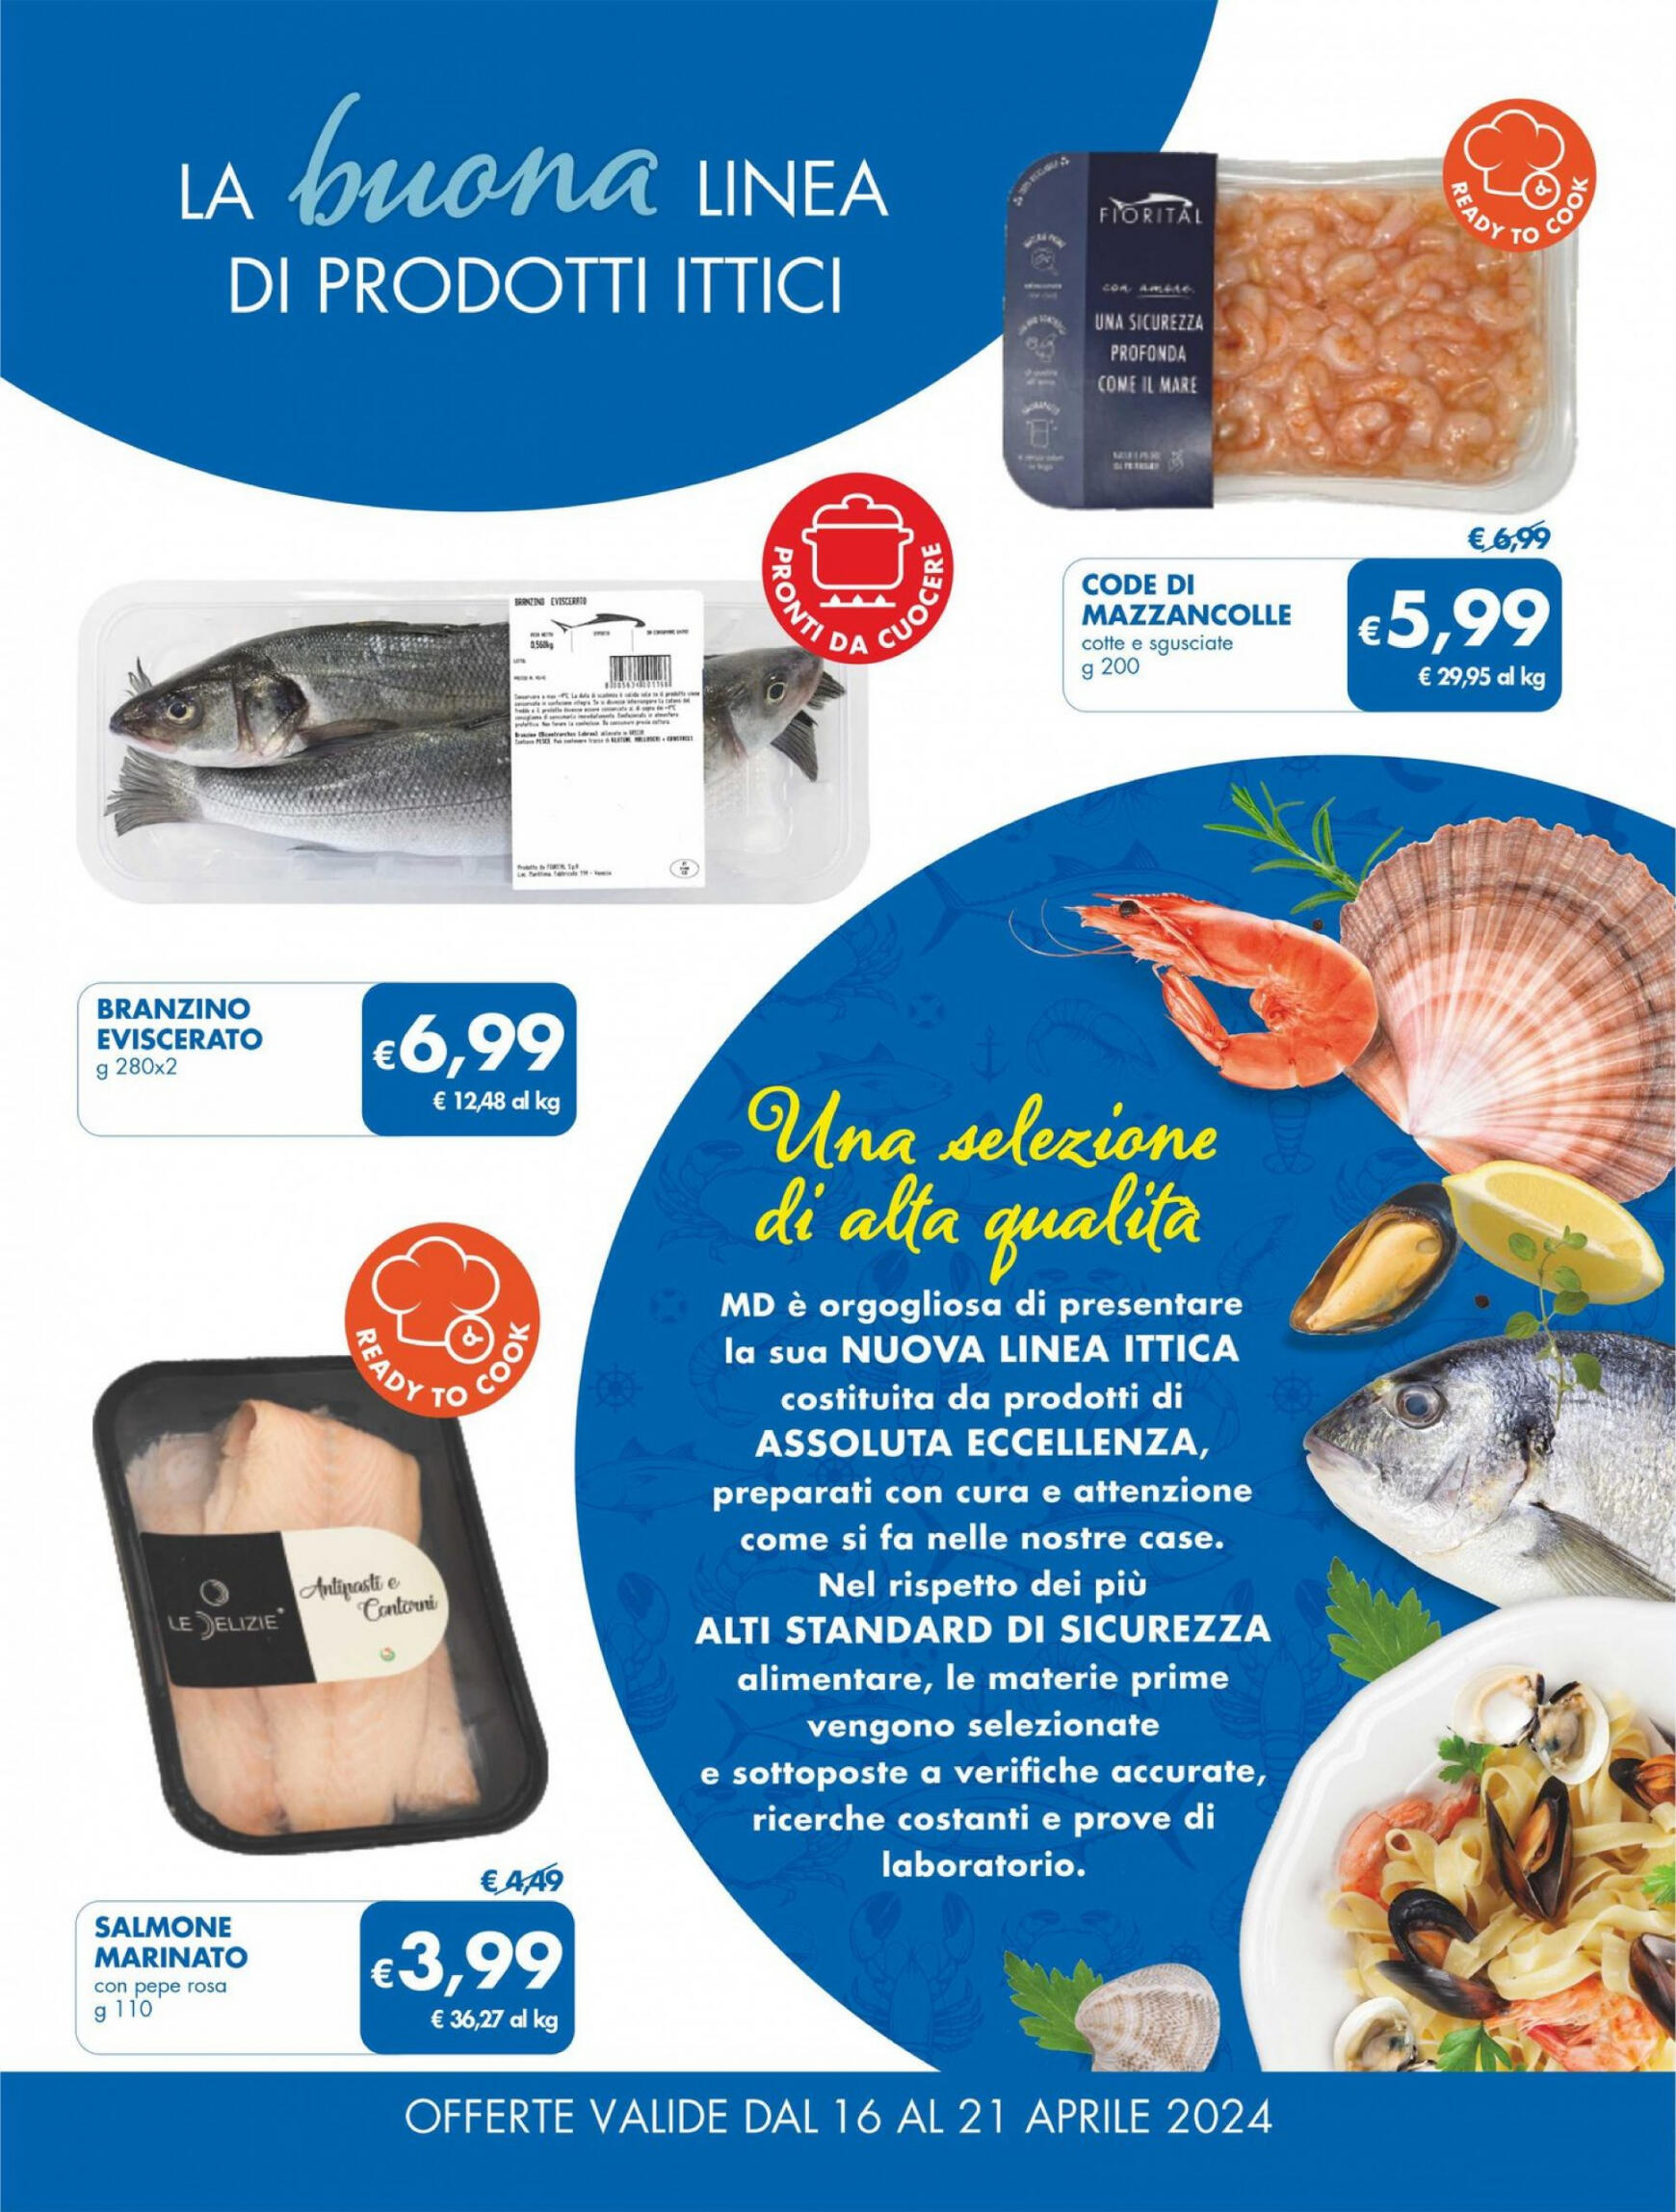 md-discount - Nuovo volantino MD 16.04. - 21.04. - page: 11